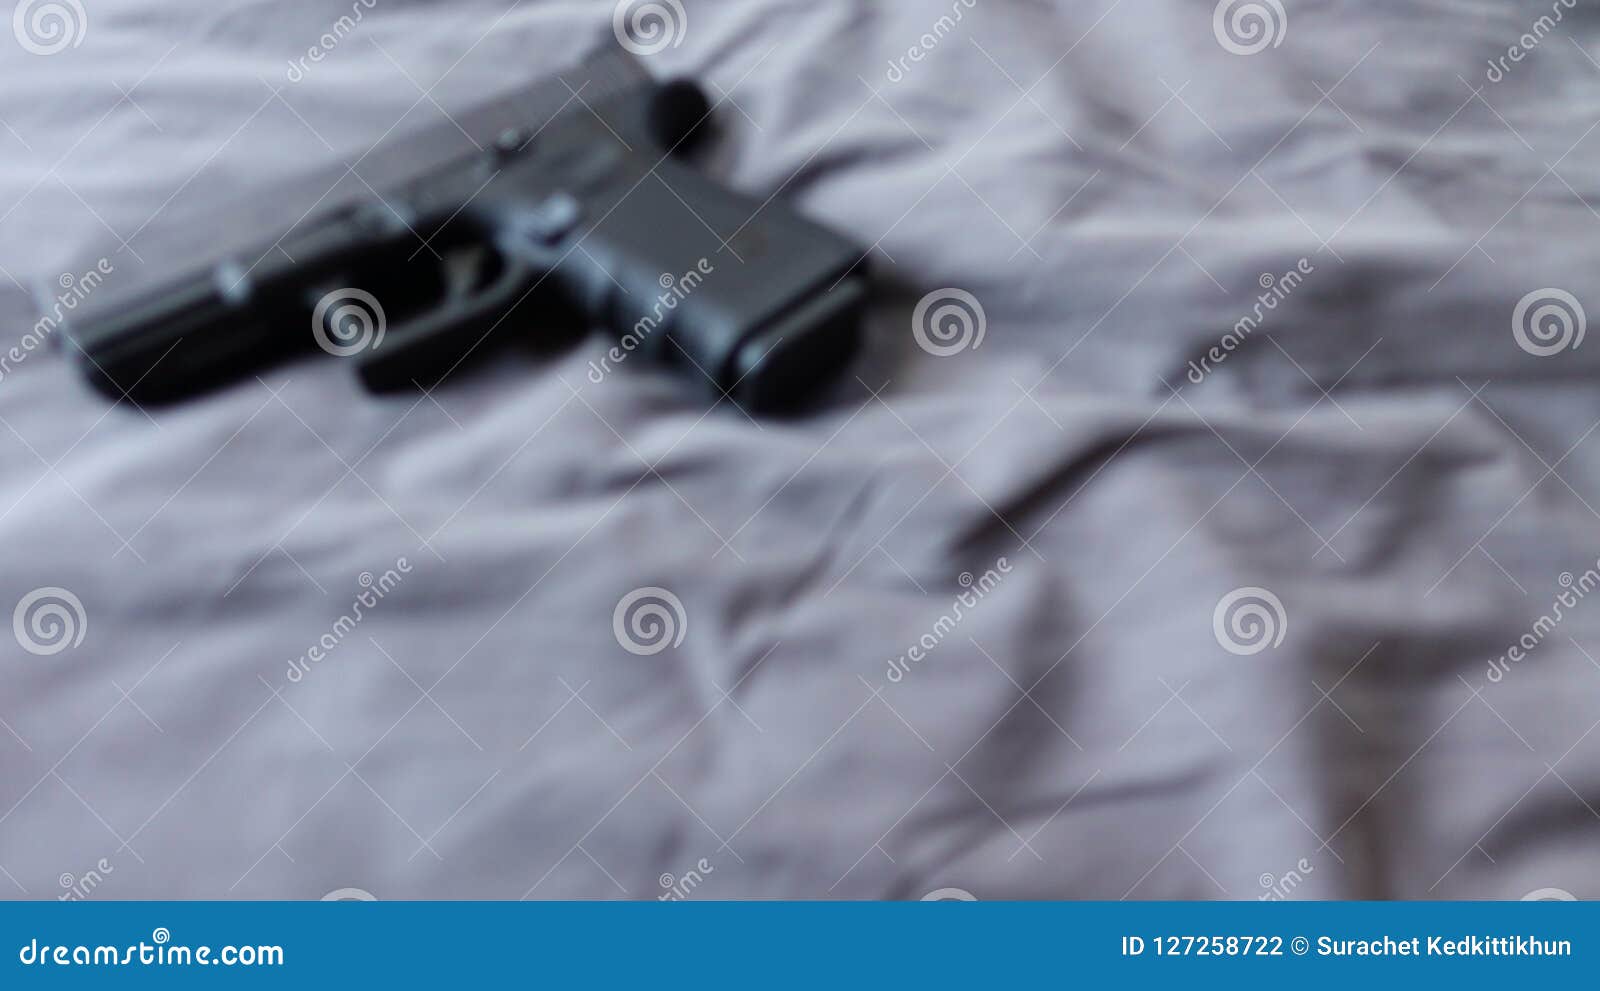 Gun on Bed, Ready To Protect from Another Bad People, B&w Crime Scene